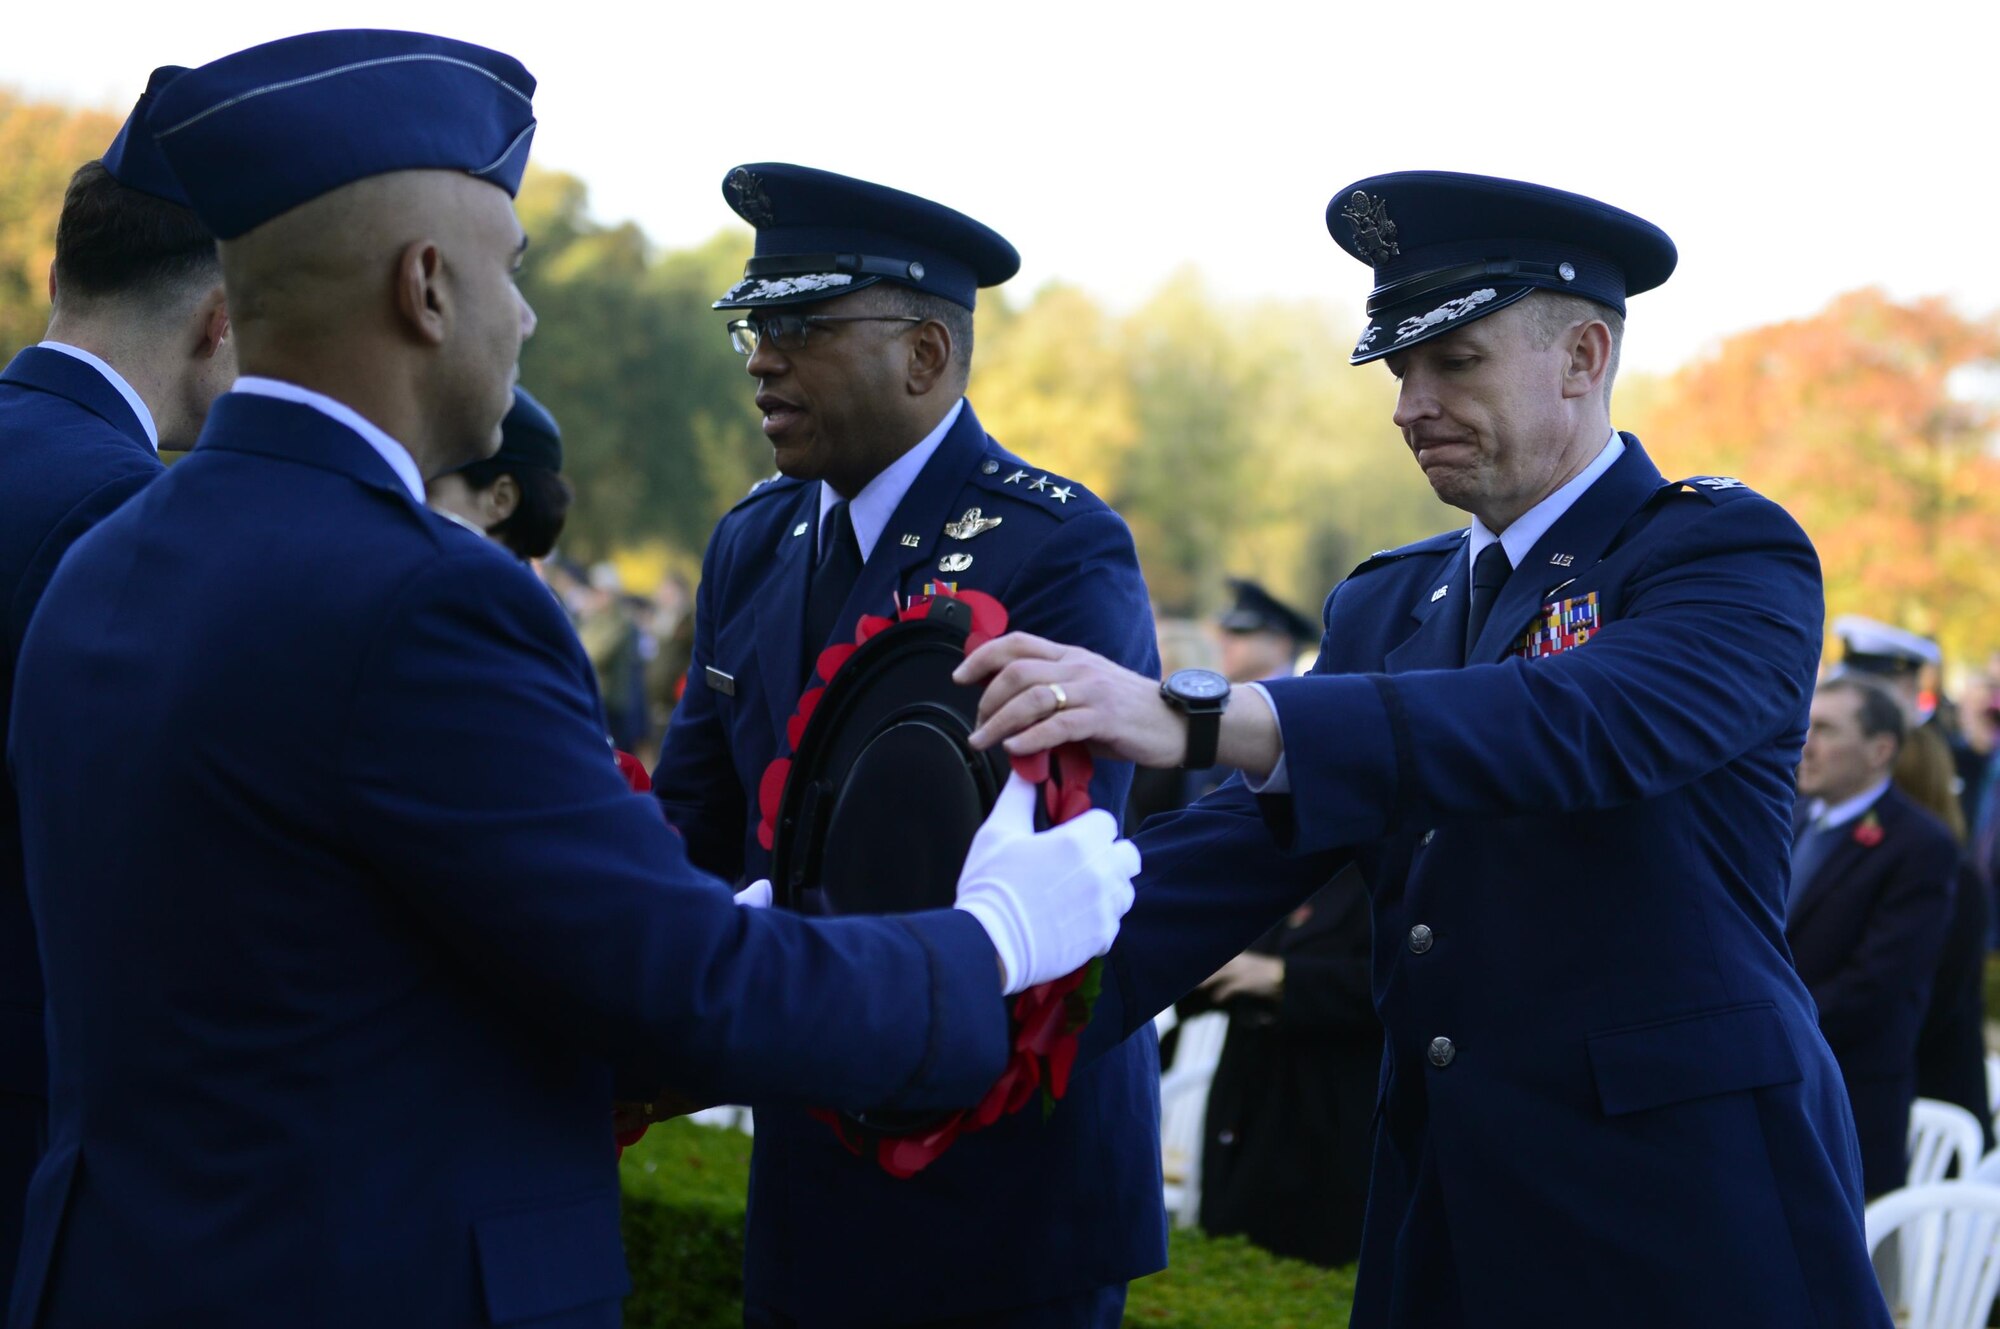 U.S. Air Force Col. Evan Pettus, 48th Fighter Wing commander, receives a wreath at the Cambridge American Cemetery in Cambridge, England, Nov. 11. Distinguished visitors and veterans were invited to participate in the ceremony by placing wreathes along the Tablets of the Missing. (U.S. Air Force photo/Senior Airman Malcolm Mayfield) 
